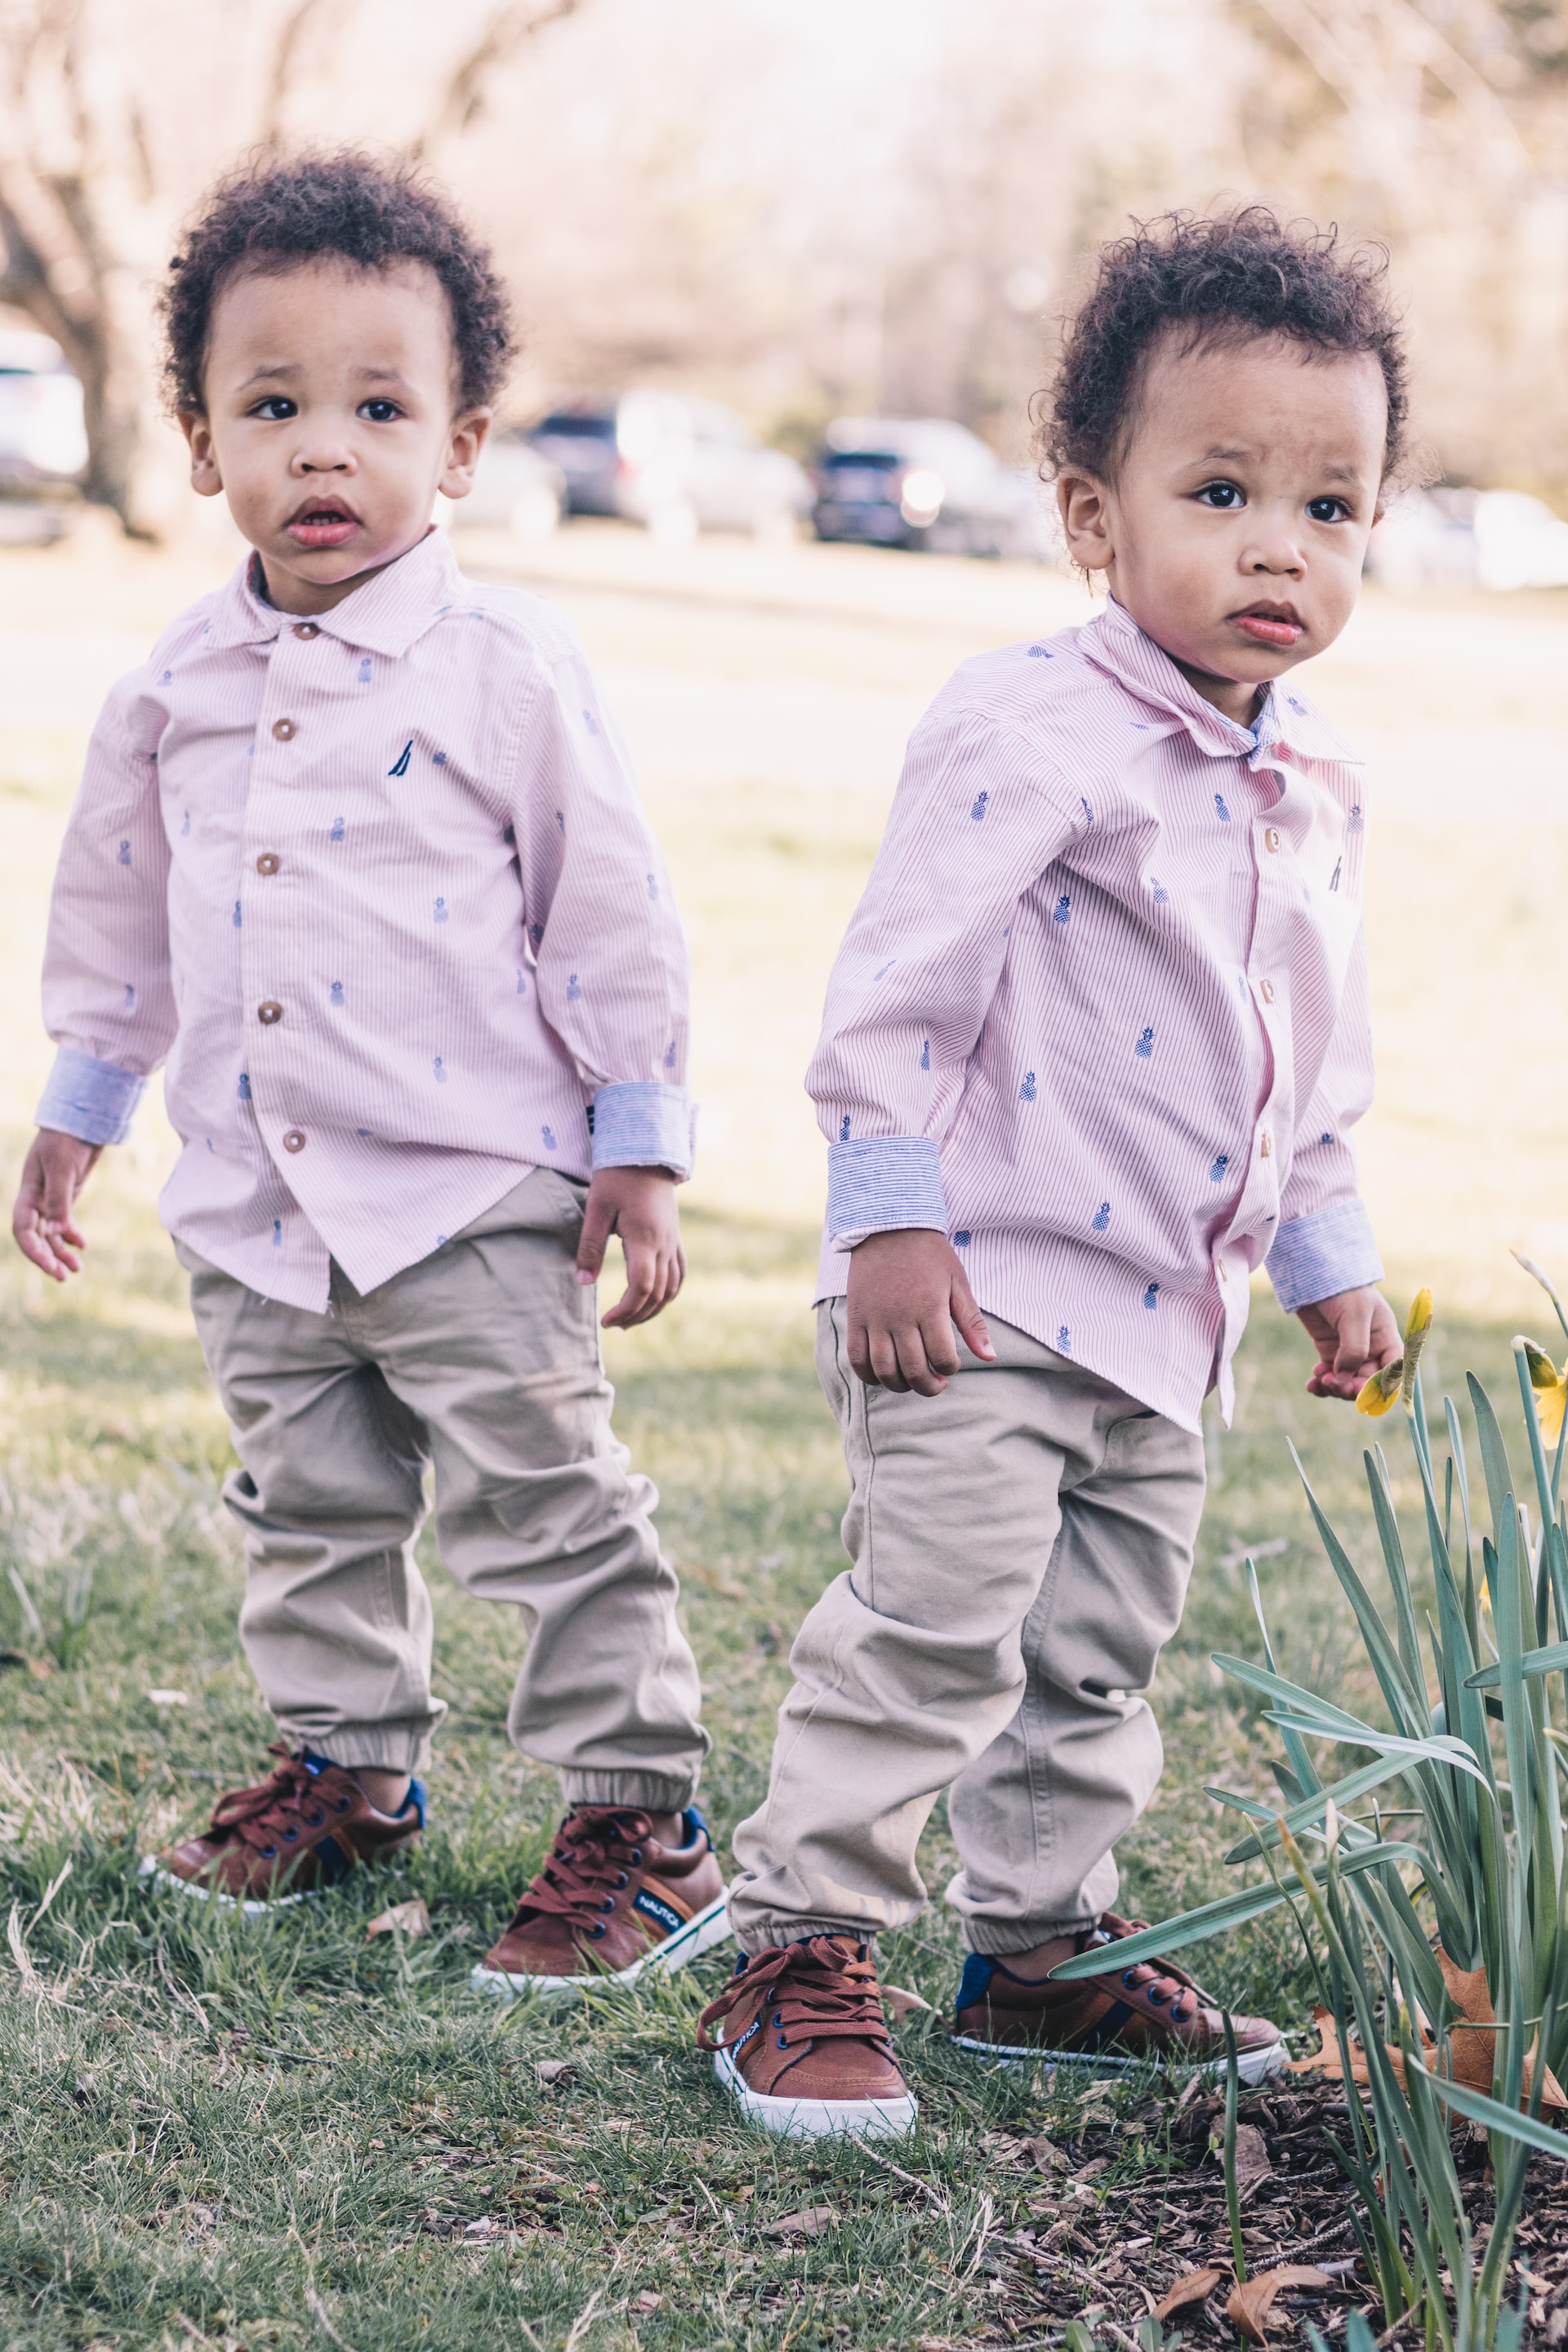 Two young boys that are twins